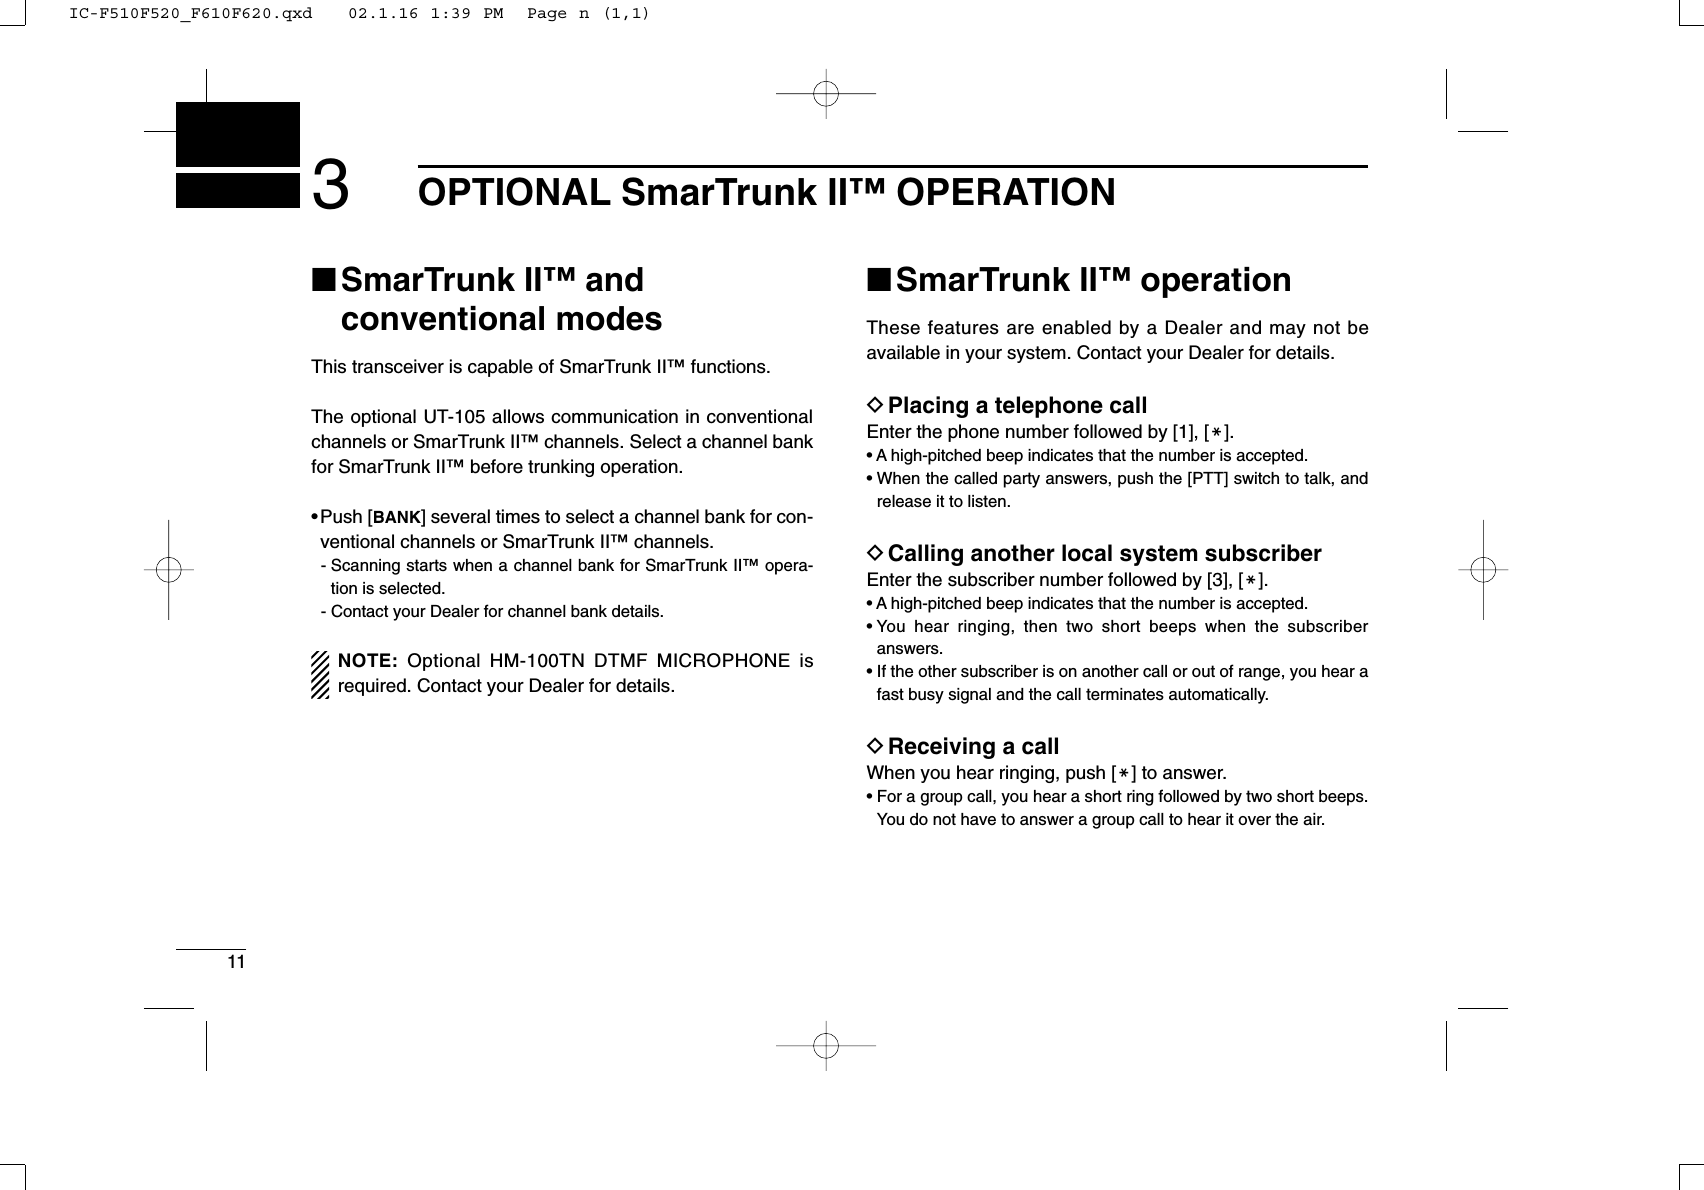 113OPTIONAL SmarTrunk II™ OPERATION■SmarTrunk II™ and conventional modesThis transceiver is capable of SmarTrunk II™ functions.The optional UT-105 allows communication in conventionalchannels or SmarTrunk II™ channels. Select a channel bankfor SmarTrunk II™ before trunking operation.• Push [BANK] several times to select a channel bank for con-ventional channels or SmarTrunk II™ channels.- Scanning starts when a channel bank for SmarTrunk II™ opera-tion is selected.- Contact your Dealer for channel bank details.NOTE: Optional HM-100TN DTMF MICROPHONE isrequired. Contact your Dealer for details.■SmarTrunk II™ operationThese features are enabled by a Dealer and may not beavailable in your system. Contact your Dealer for details.DPlacing a telephone callEnter the phone number followed by [1], [M].• A high-pitched beep indicates that the number is accepted.• When the called party answers, push the [PTT] switch to talk, andrelease it to listen.DCalling another local system subscriberEnter the subscriber number followed by [3], [M].• A high-pitched beep indicates that the number is accepted.• You hear ringing, then two short beeps when the subscriberanswers.• If the other subscriber is on another call or out of range, you hear afast busy signal and the call terminates automatically.DReceiving a callWhen you hear ringing, push [M] to answer.• For a group call, you hear a short ring followed by two short beeps.You do not have to answer a group call to hear it over the air.IC-F510F520_F610F620.qxd   02.1.16 1:39 PM  Page n (1,1)